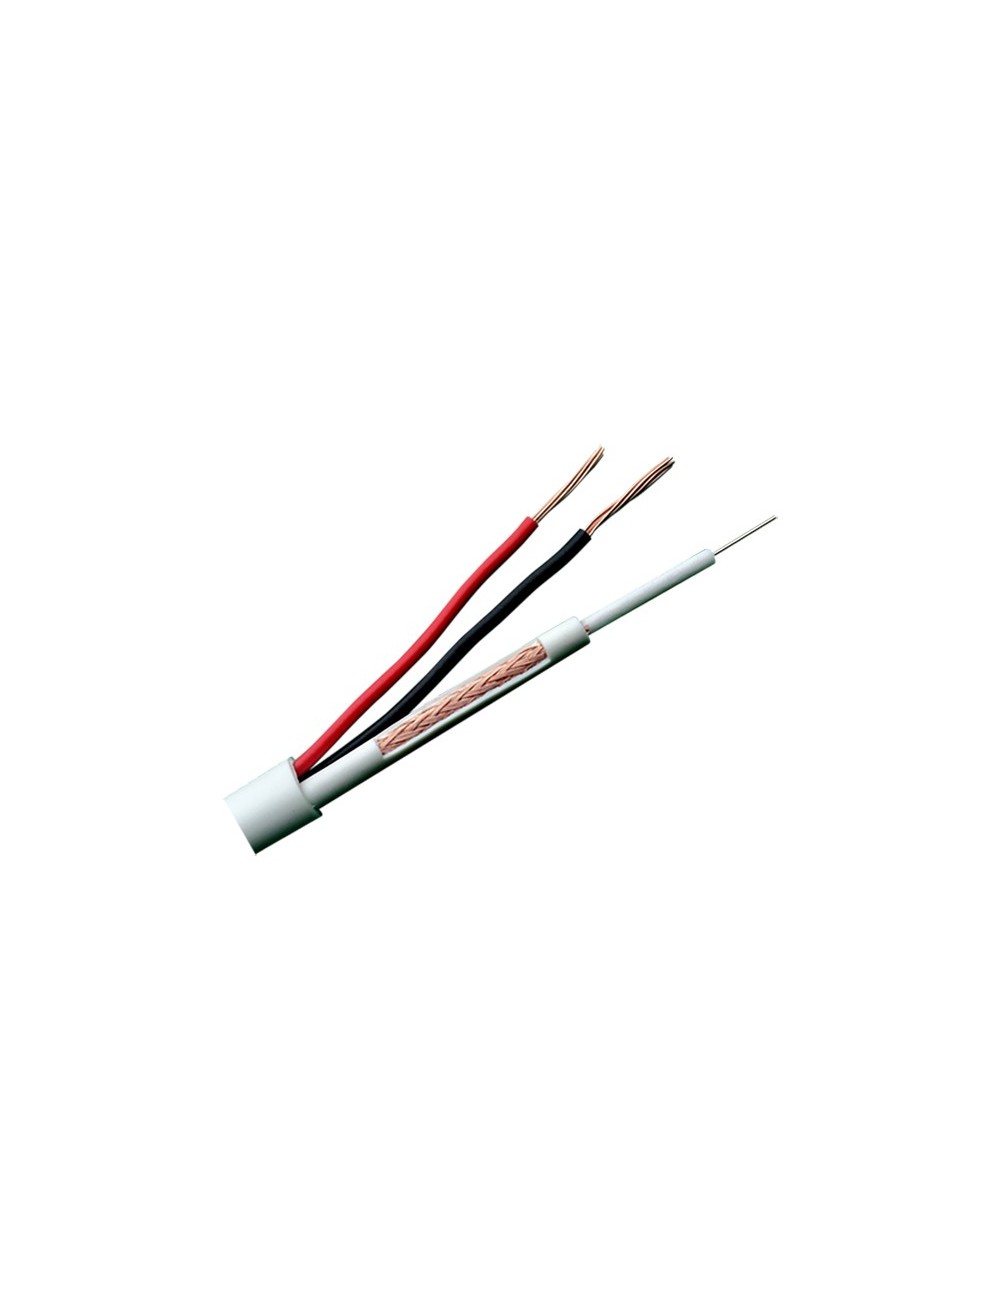 Coaxial cable combined with micro video RG59 + power supply